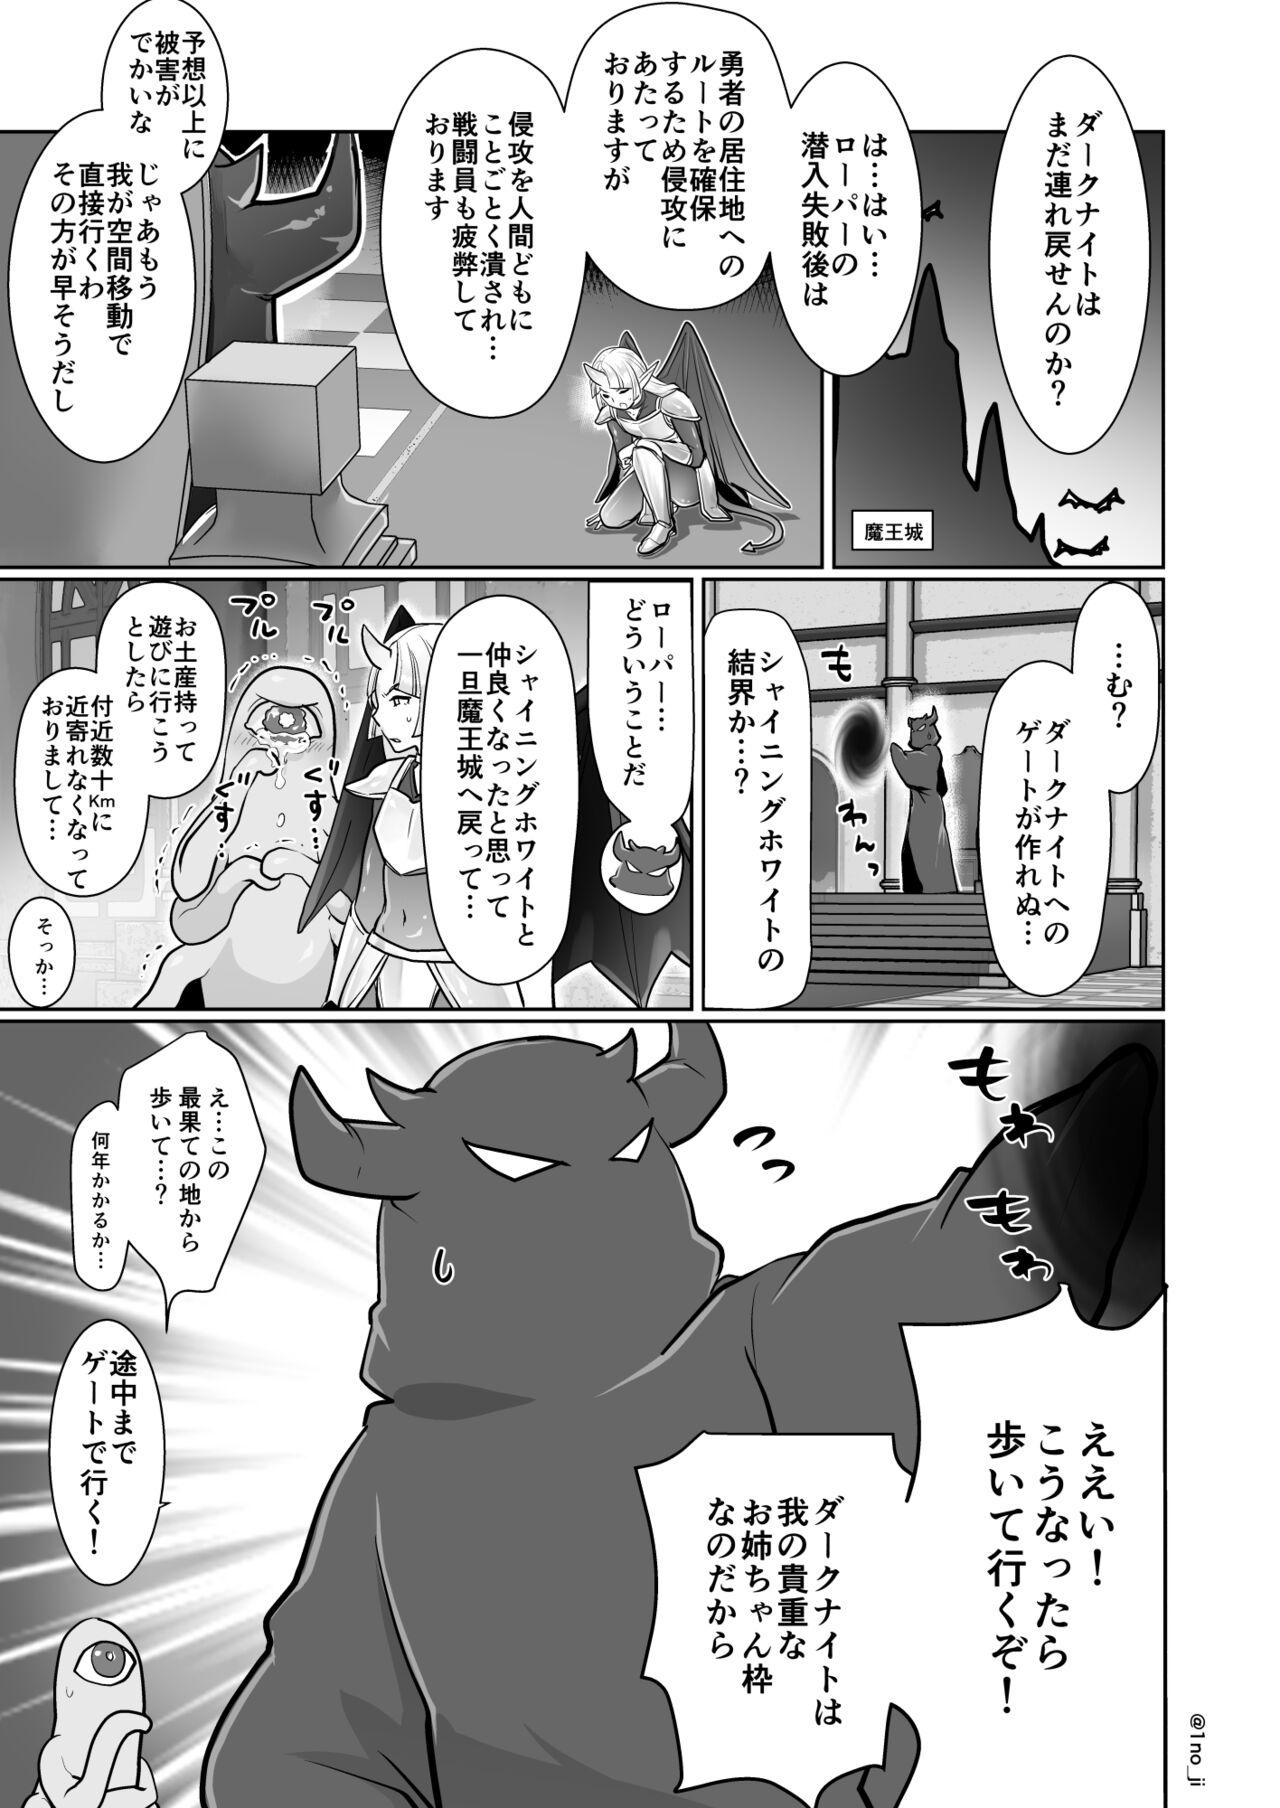 Couch 魔王軍の元幹部♂が勇者に負けてメスにされる話2【ダークナイトさんシリーズ】 - Original Groping - Page 2